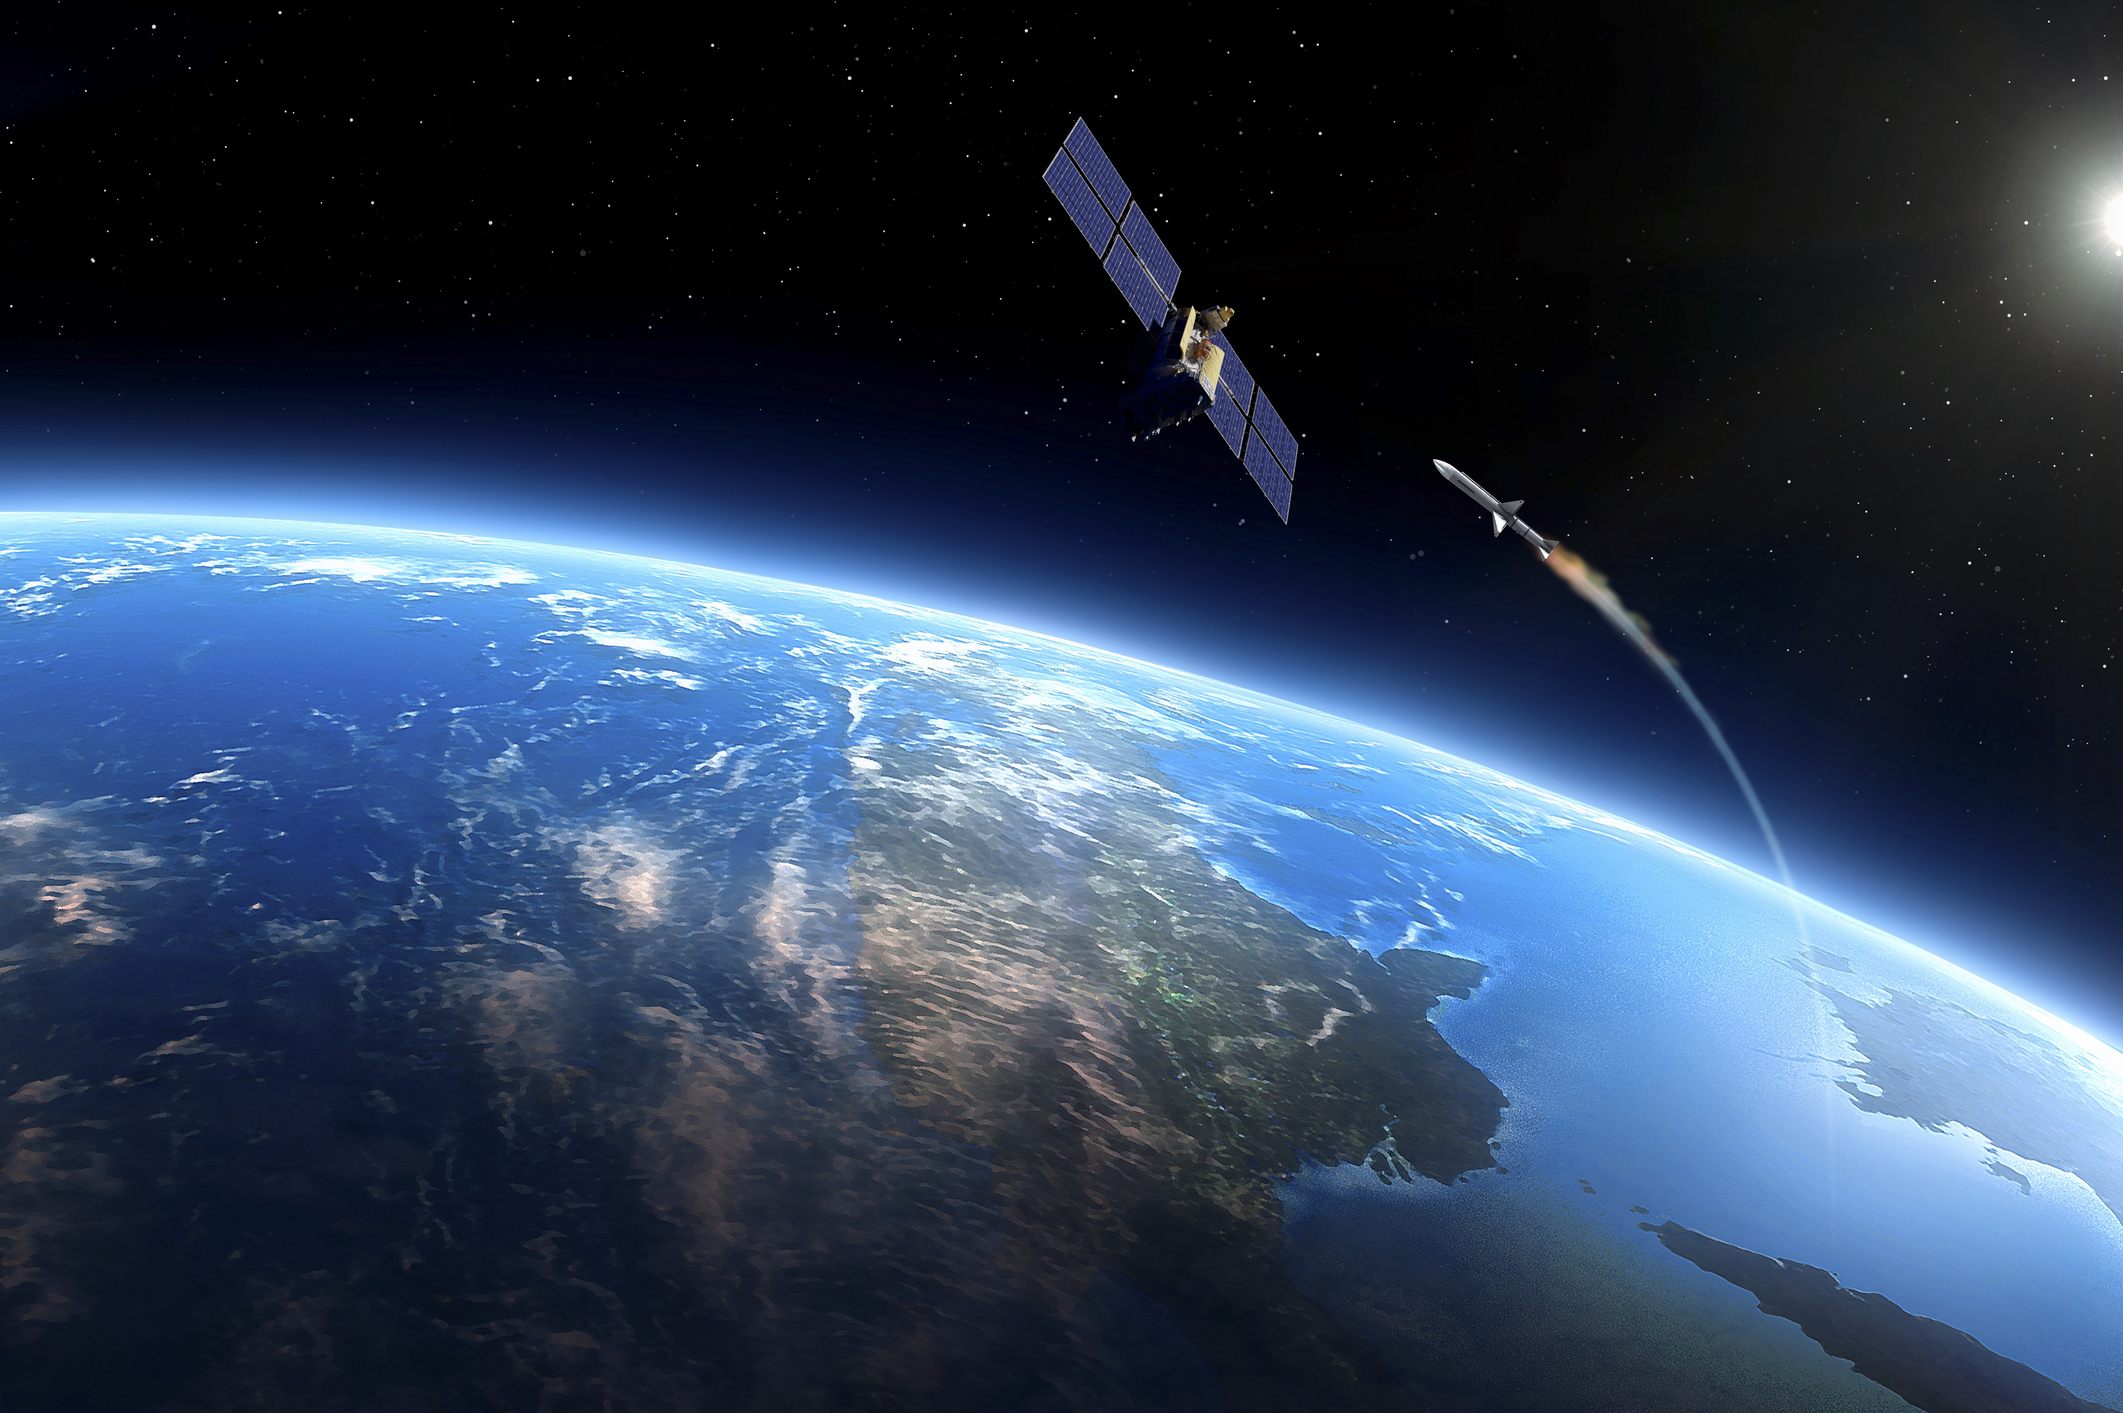 illustration of missile approaching a satellite in orbit around the earth